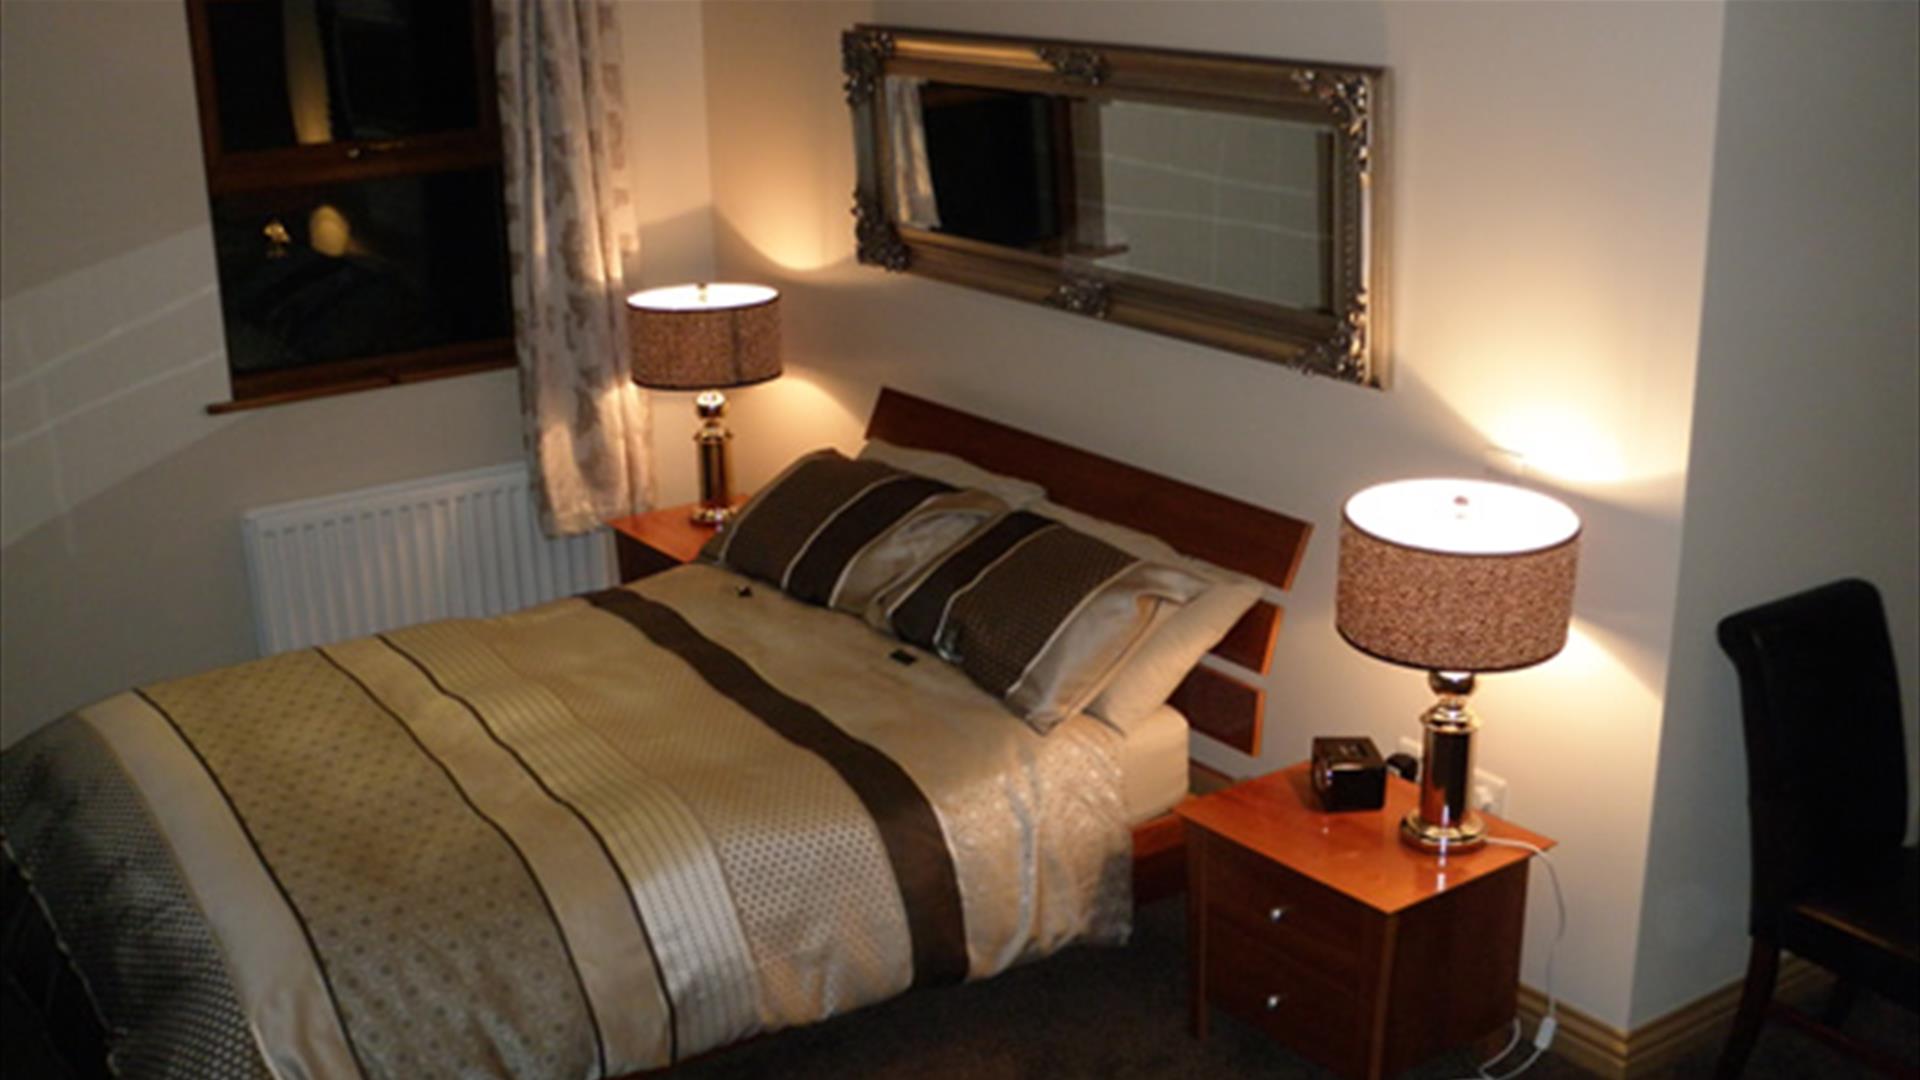 Image is of double bedroom at Dunhill Farm